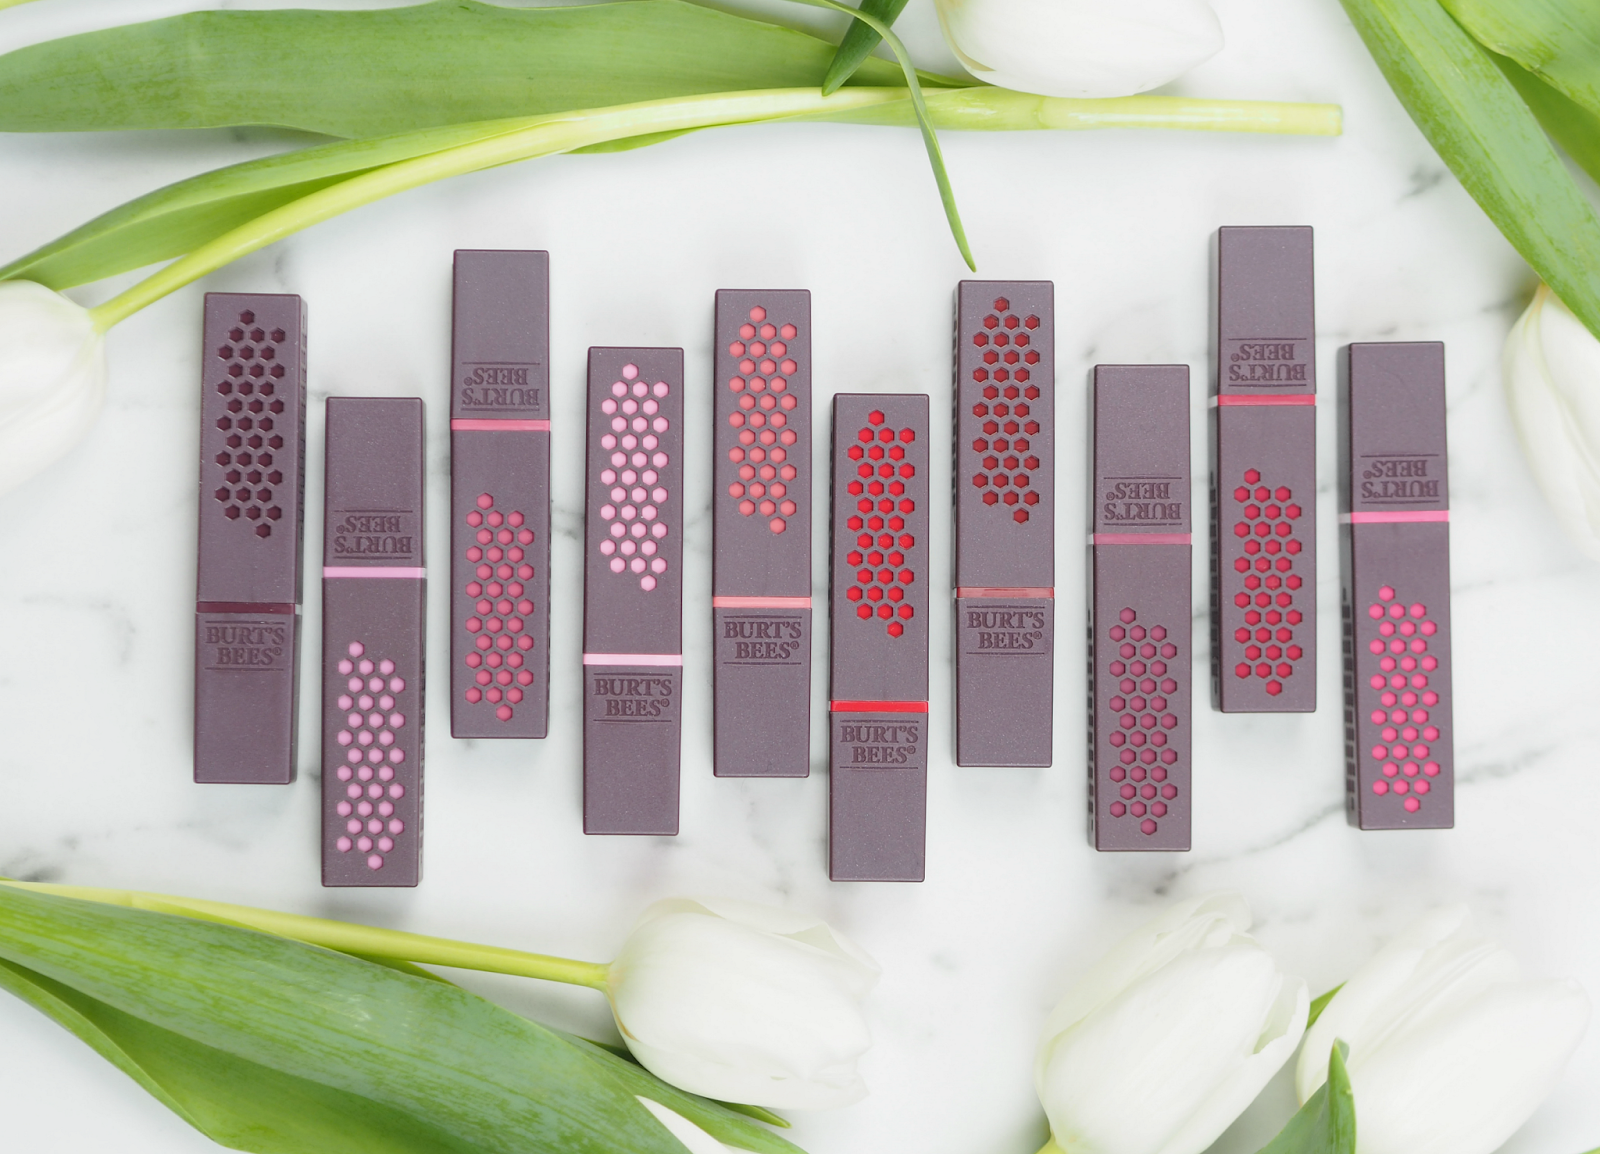 Supercharged High Pigment Lip Colours That Are OH-SO COMFY: Burt's Bees NEW Lipsticks